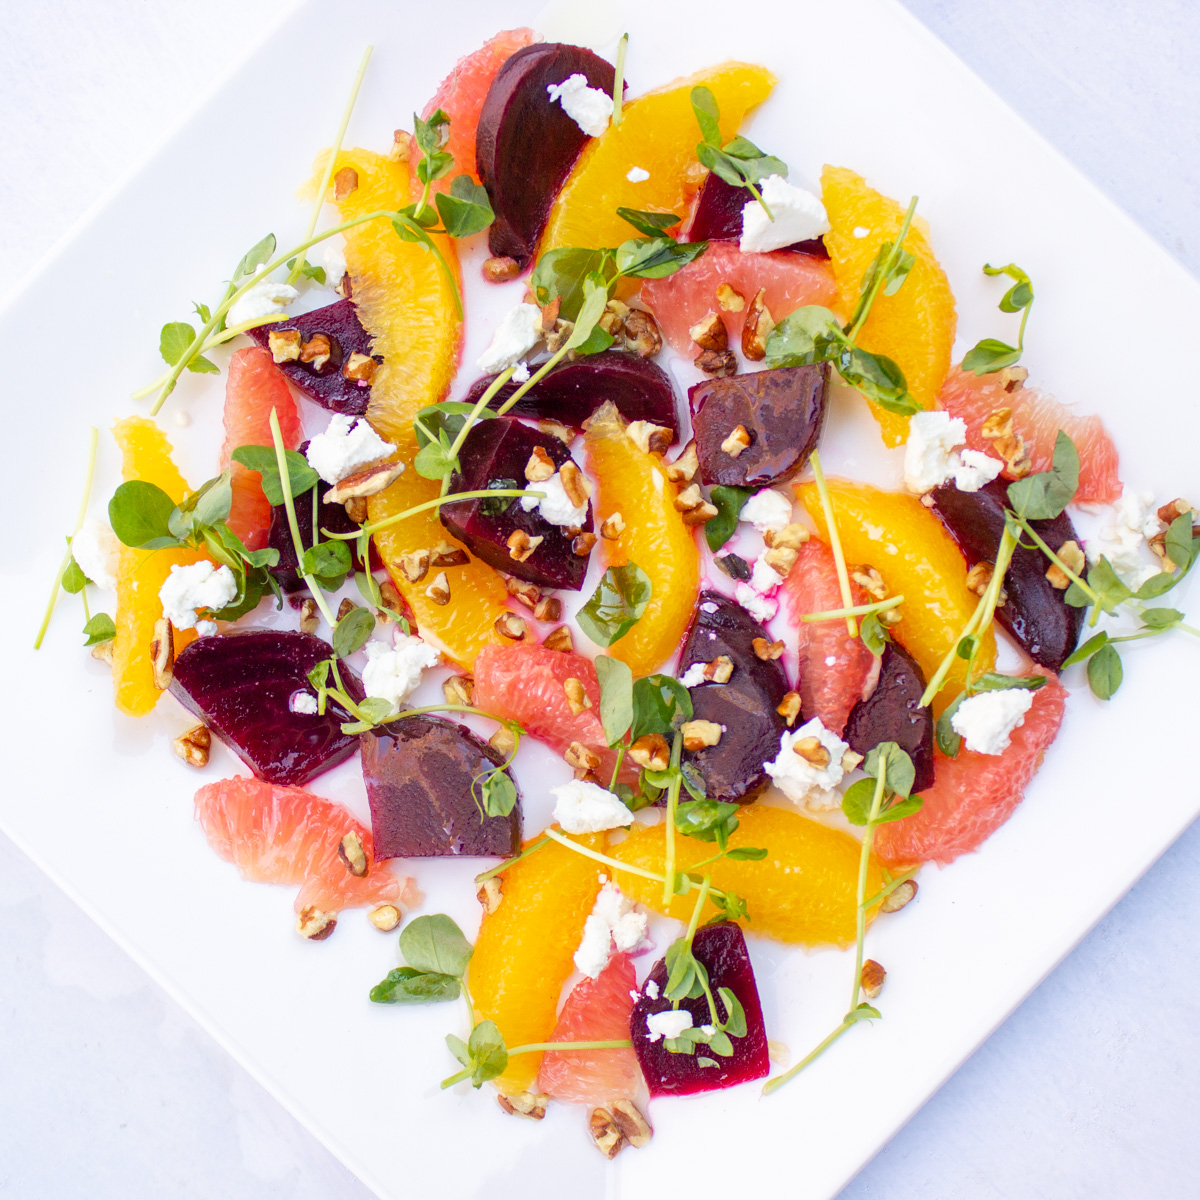 beetroot salad with citrus fruit and goat cheese on white plate